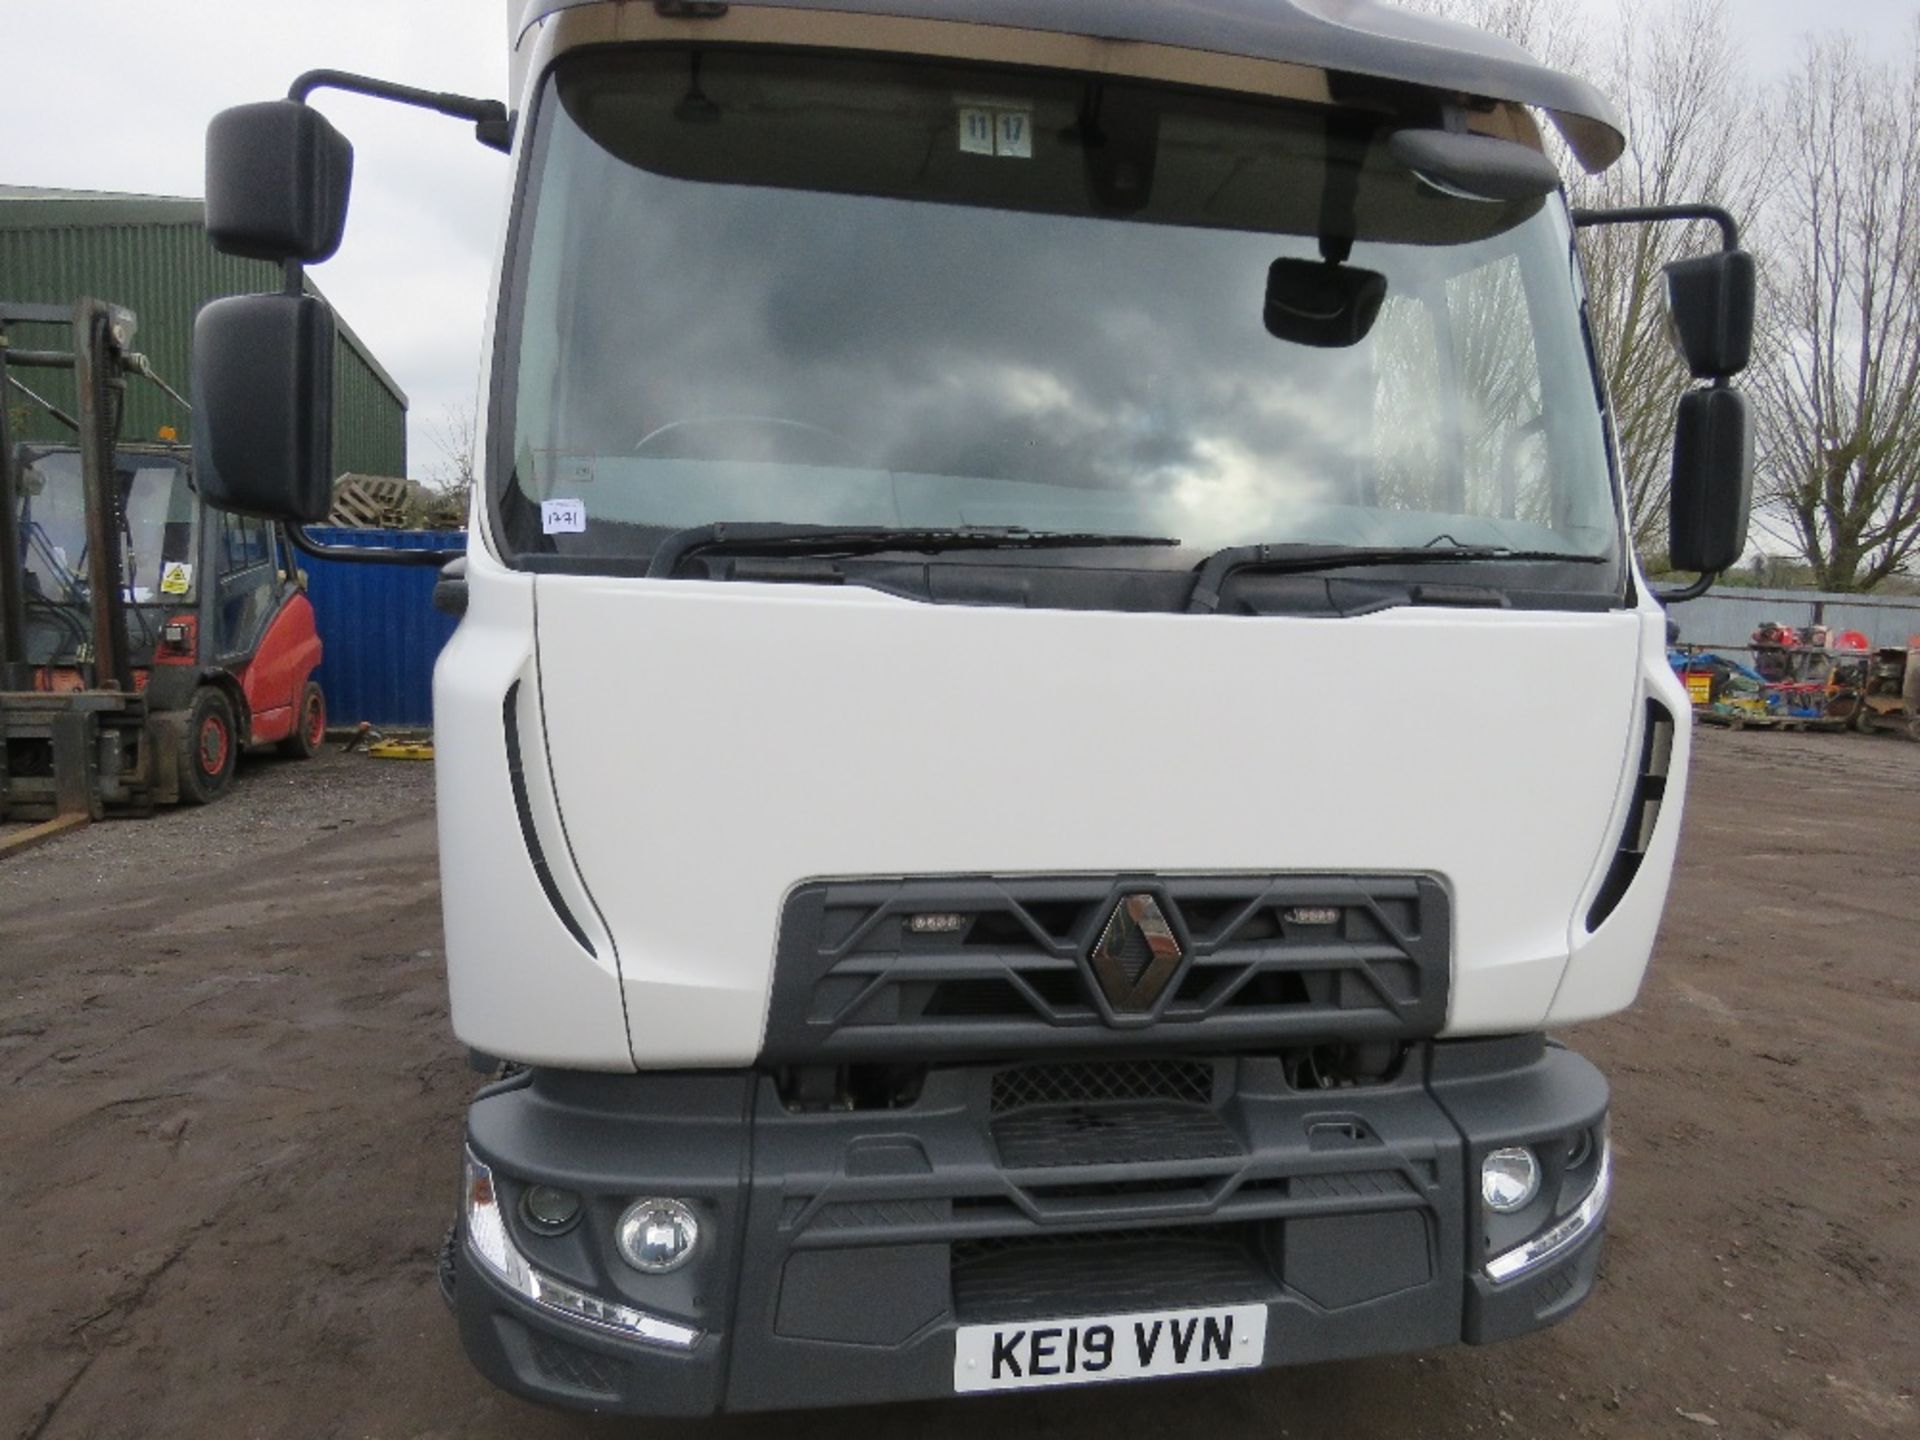 RENAULT D75 BOX LORRY REG:KE19 VVN. 7500KG RATED, DIRECT FROM LOCAL COMPANY WHO ARE SELLING DUE TO A - Image 3 of 16